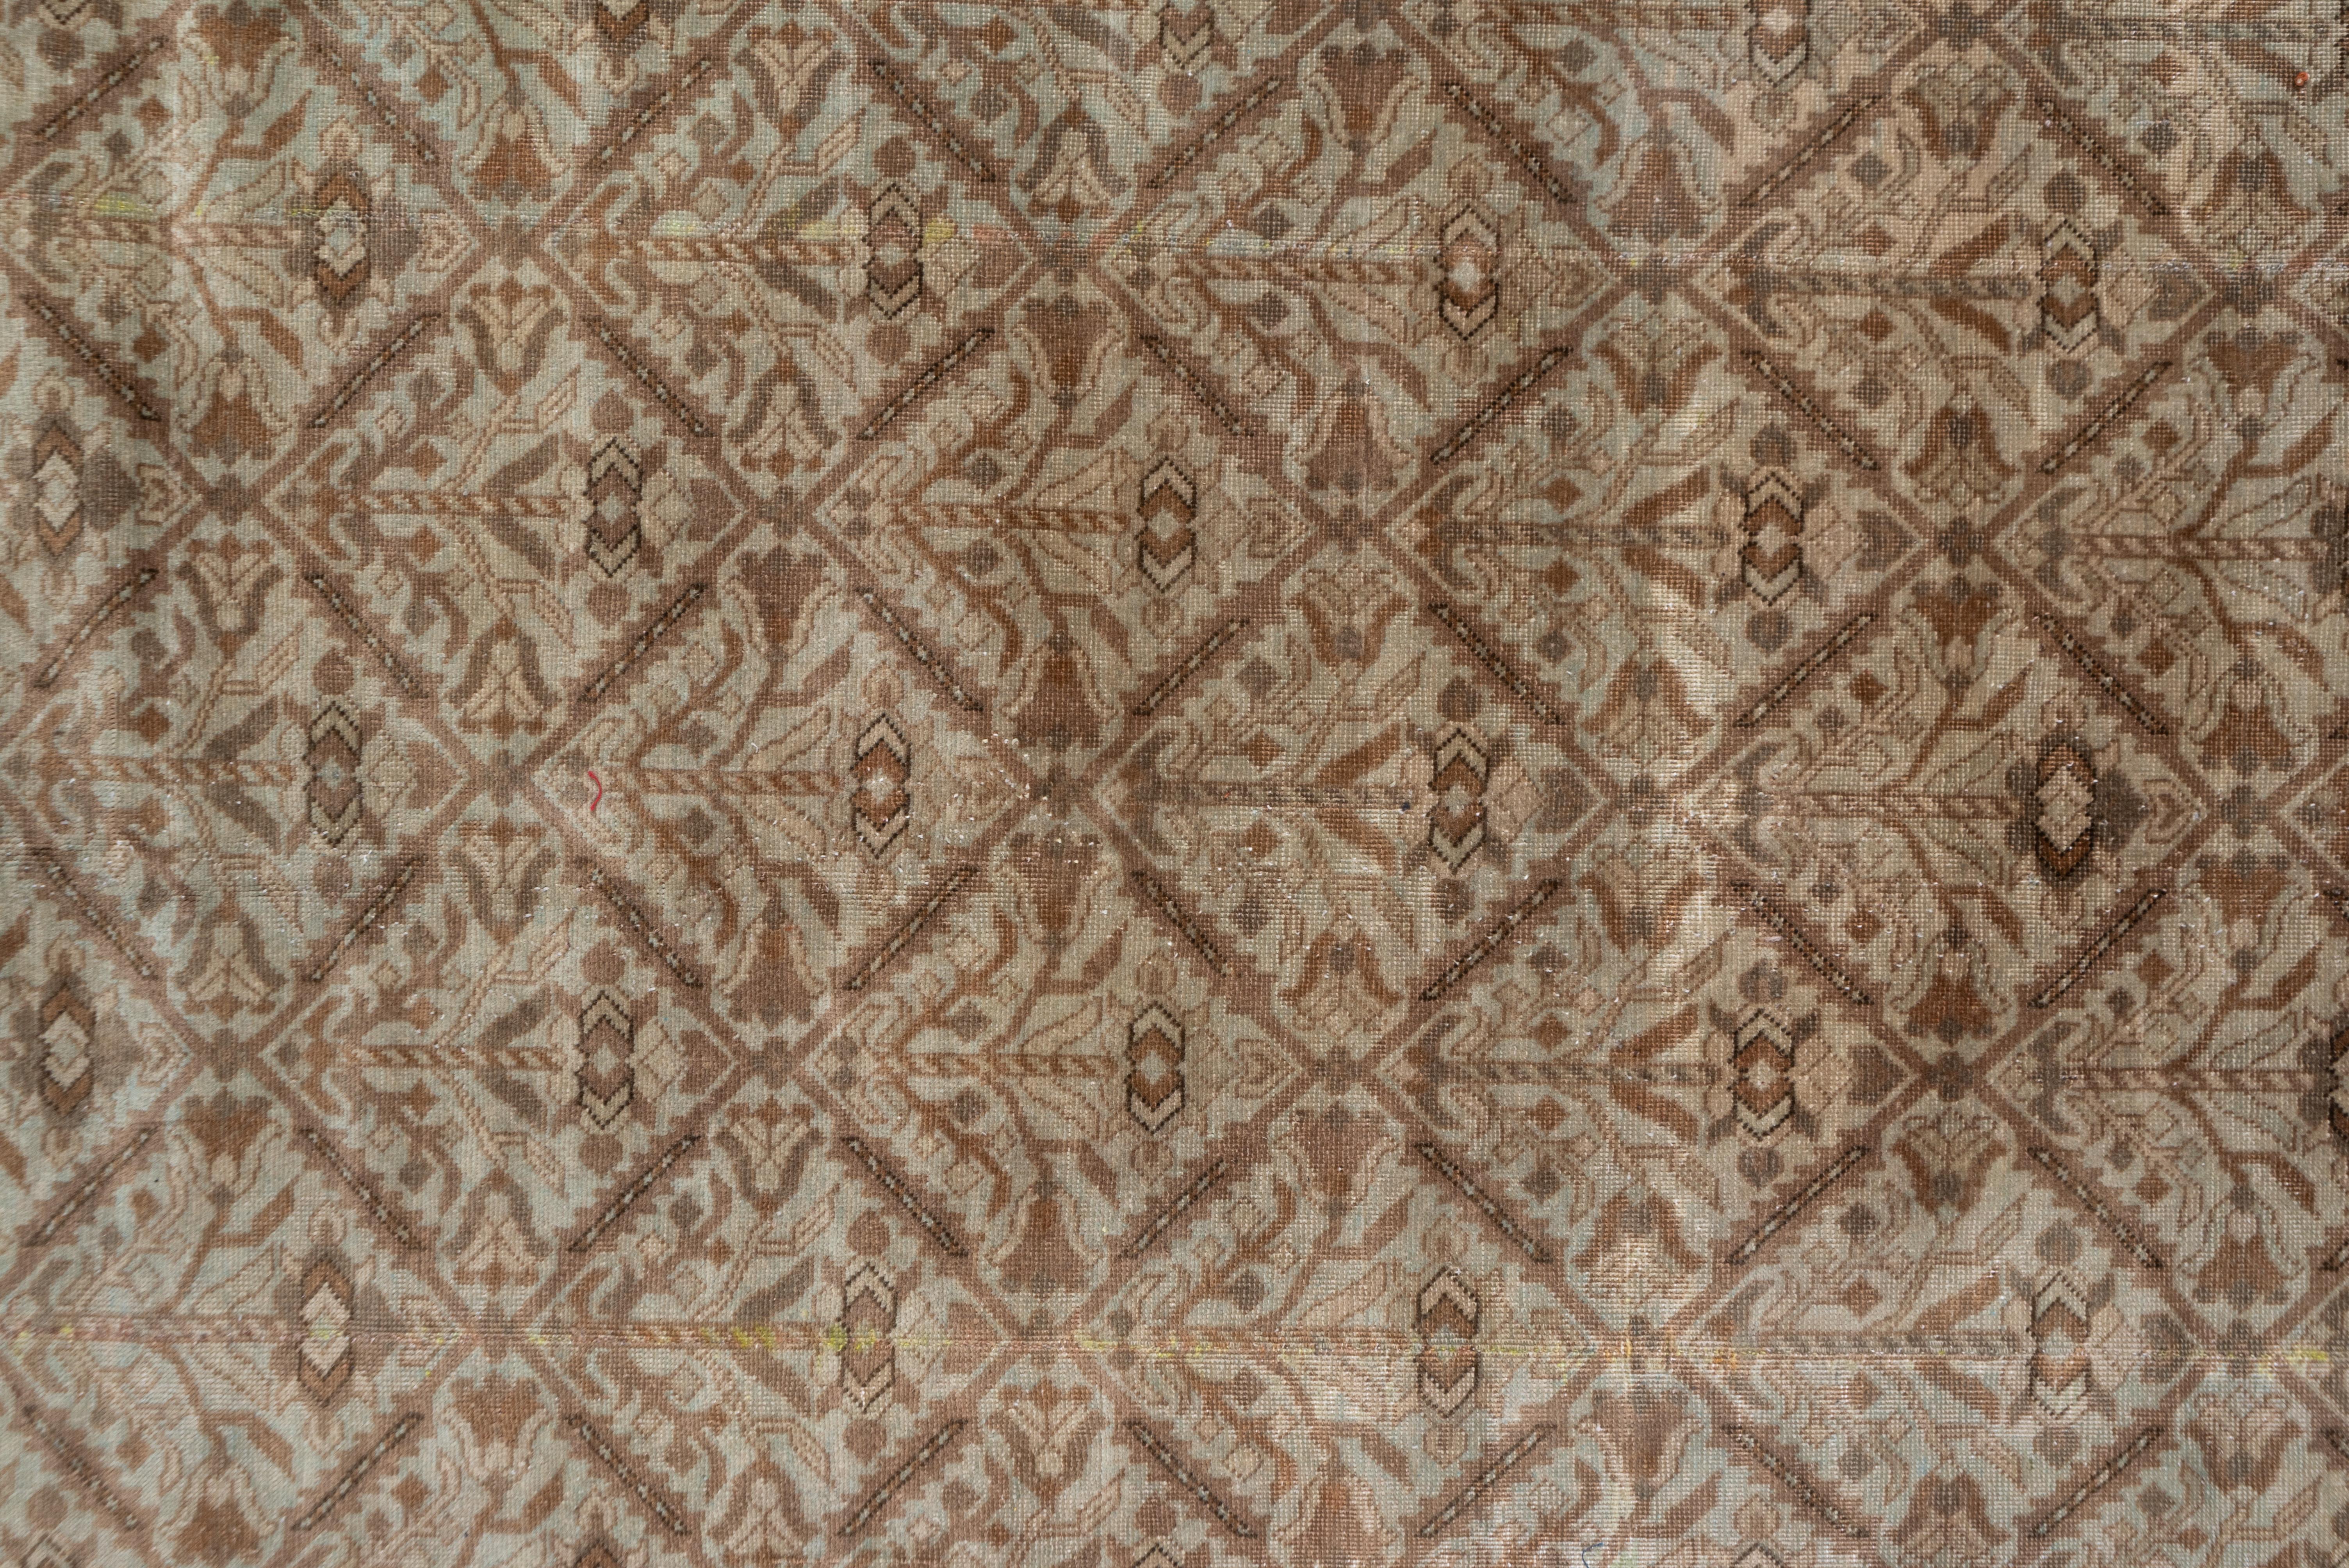 Hand-Knotted Earth Toned Geometric Antique Turkish Sivas Rug, circa 1930s For Sale